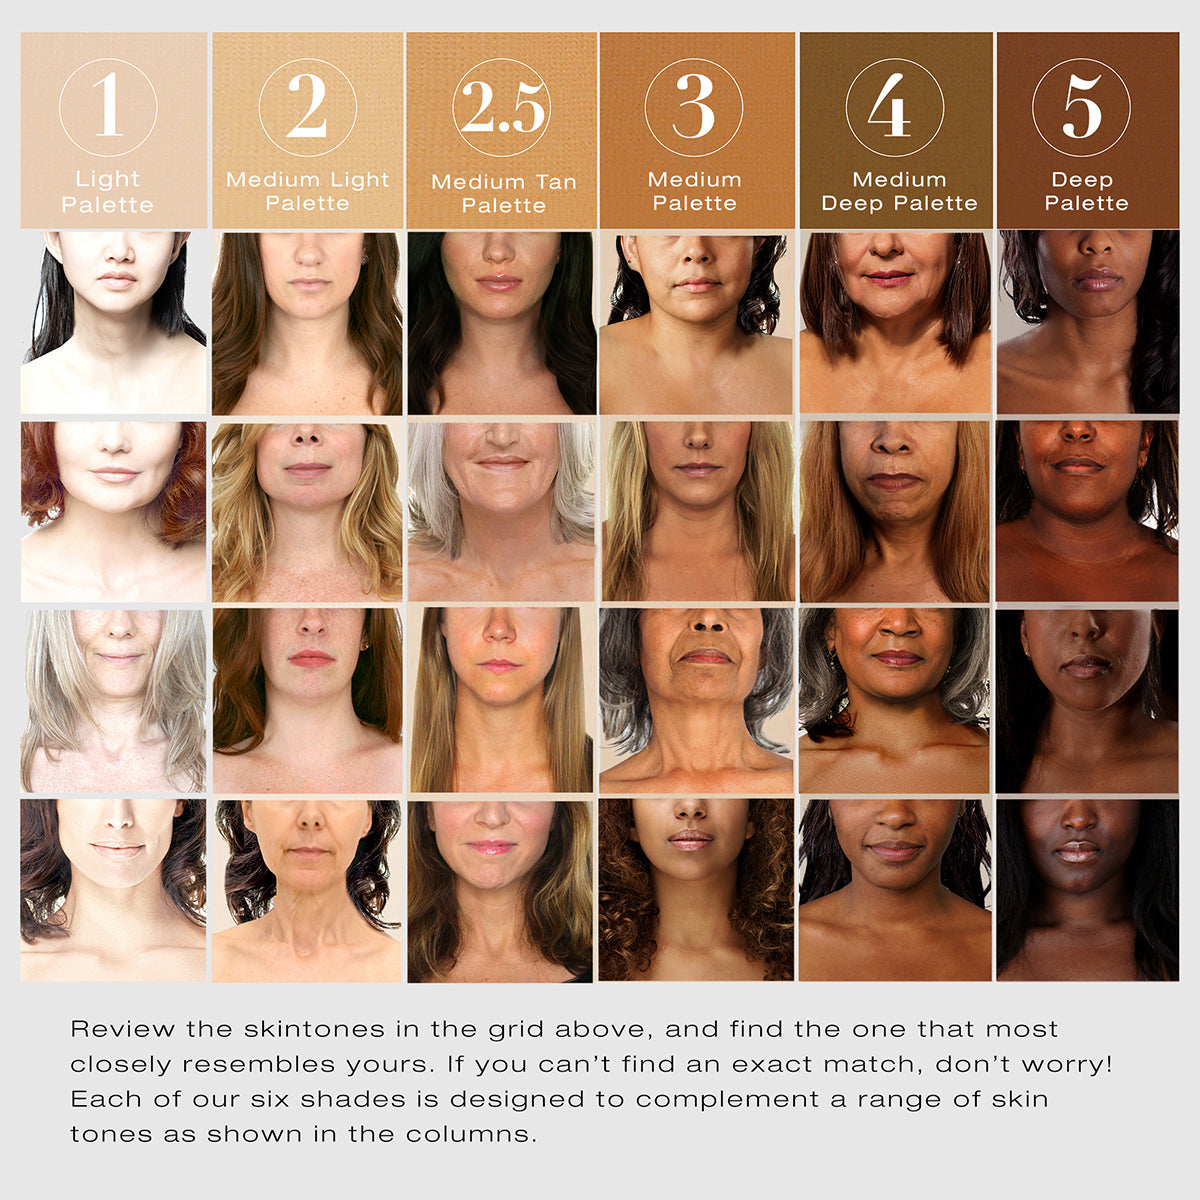 a chart with women of various skin tones, ranging from #1 light (fair, porcelain skin) all the way to #5 deep (dark African skin); #2 medium light shows caucasian women, #2.5 medium tan shows caucasian women with slightly tan skin, #3 medium shows very tan, hispanic & multi-ethnic women, and #4 medium deep shows African American women